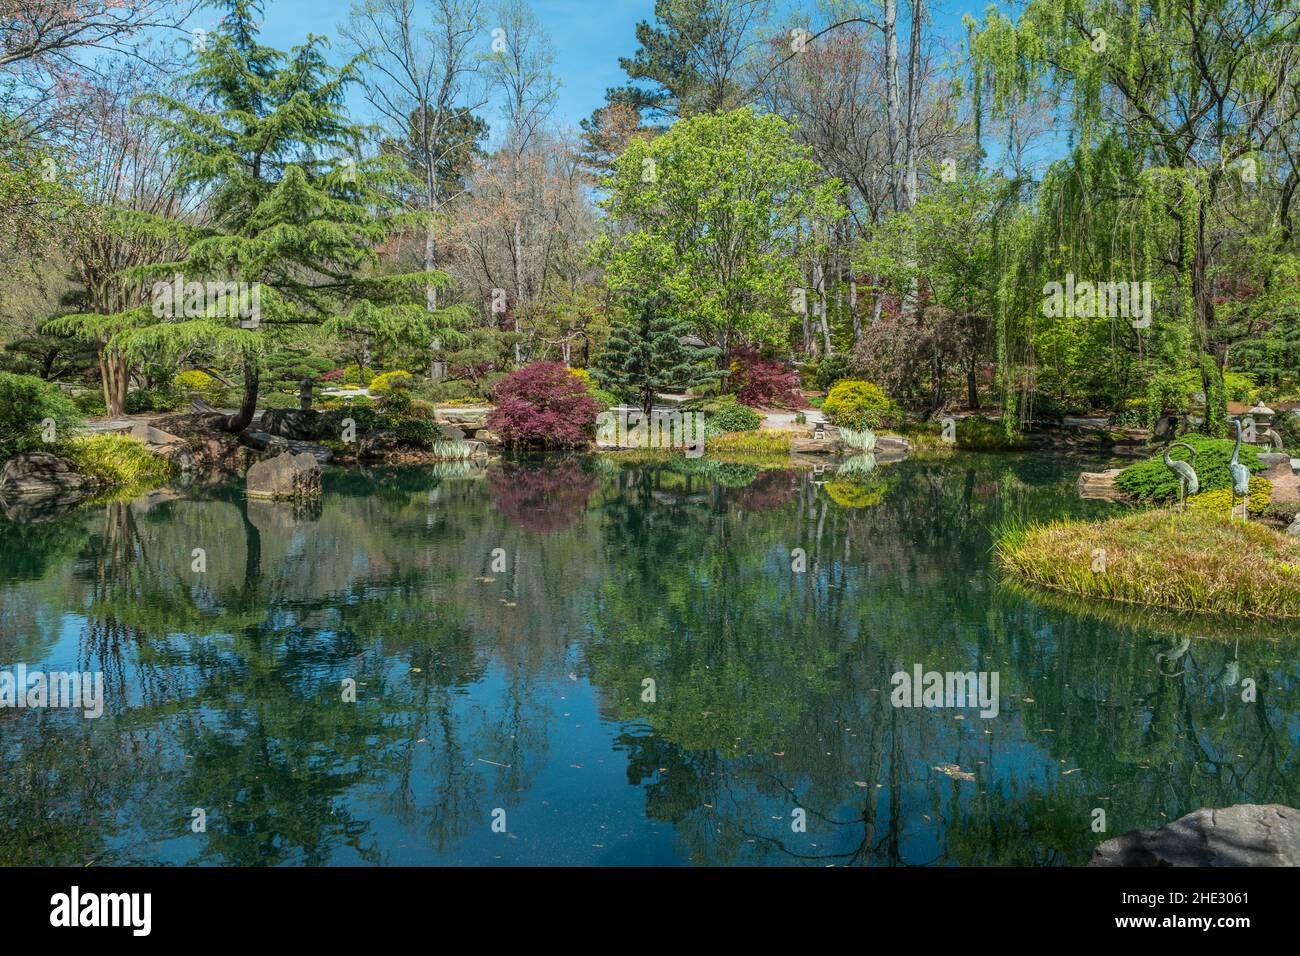 A beautiful tranquil setting at the Japanese garden with vibrant colors of spring emerging reflective in the pond at Gibbs gardens in the north Georgi Stock Photo